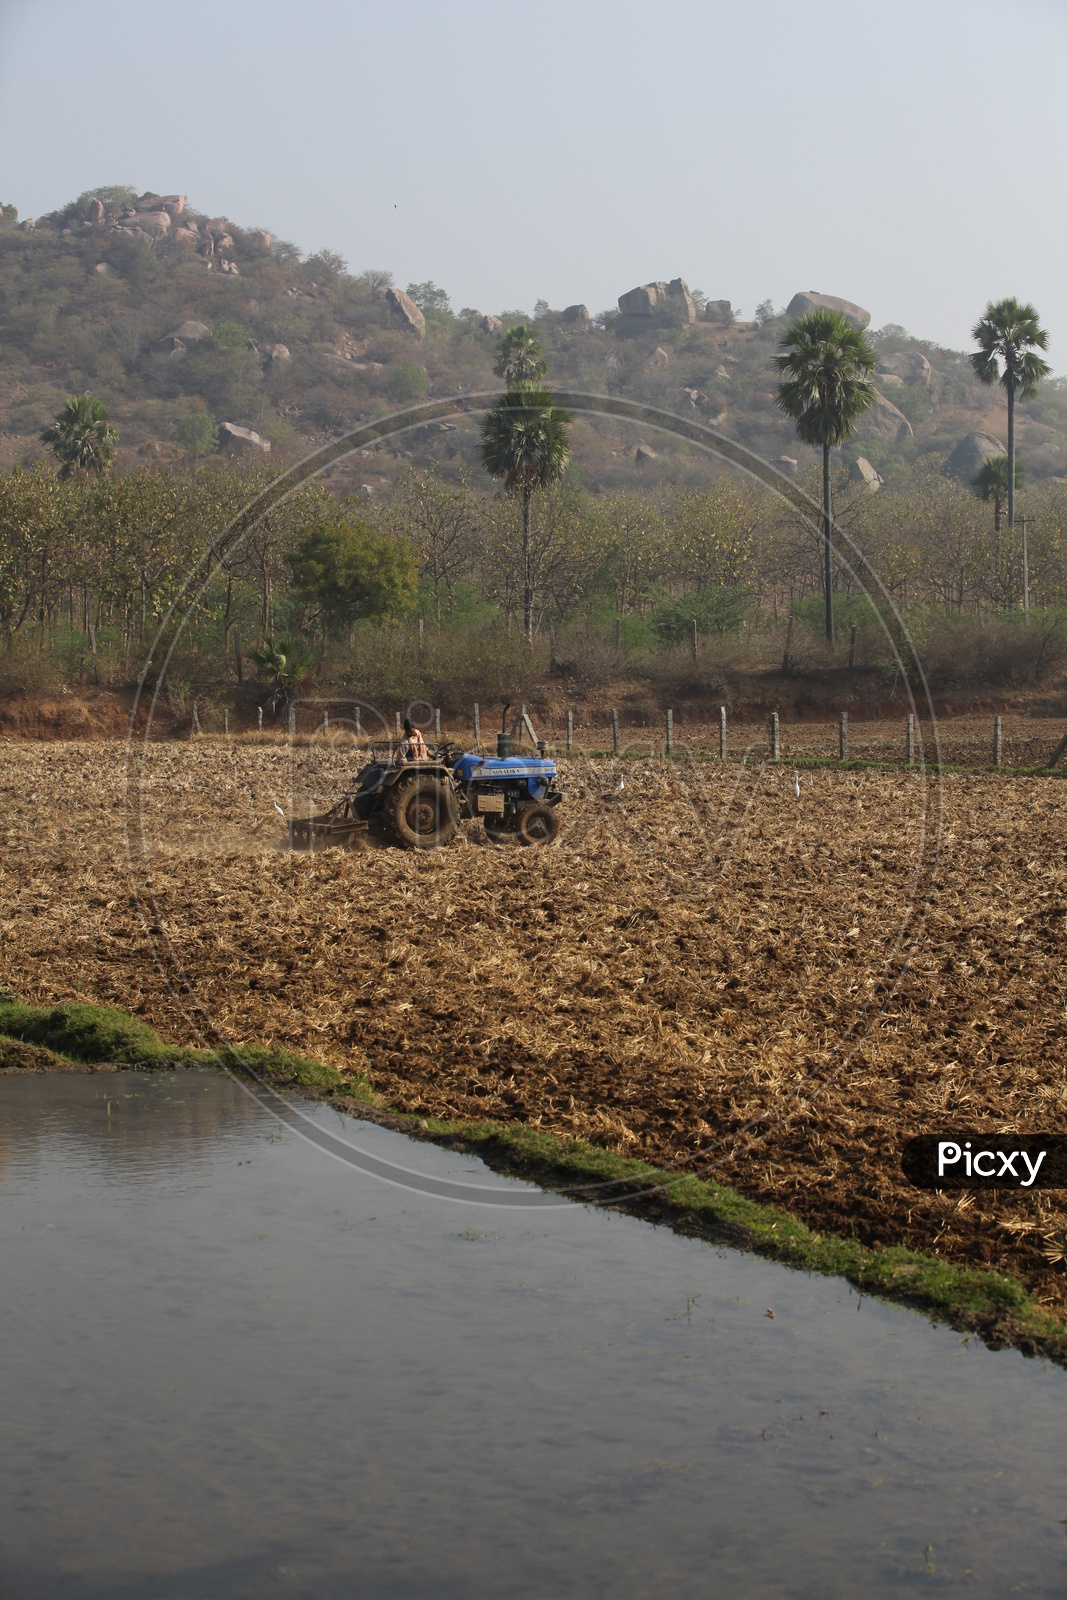 Indian Farmers Ploughing  The Field